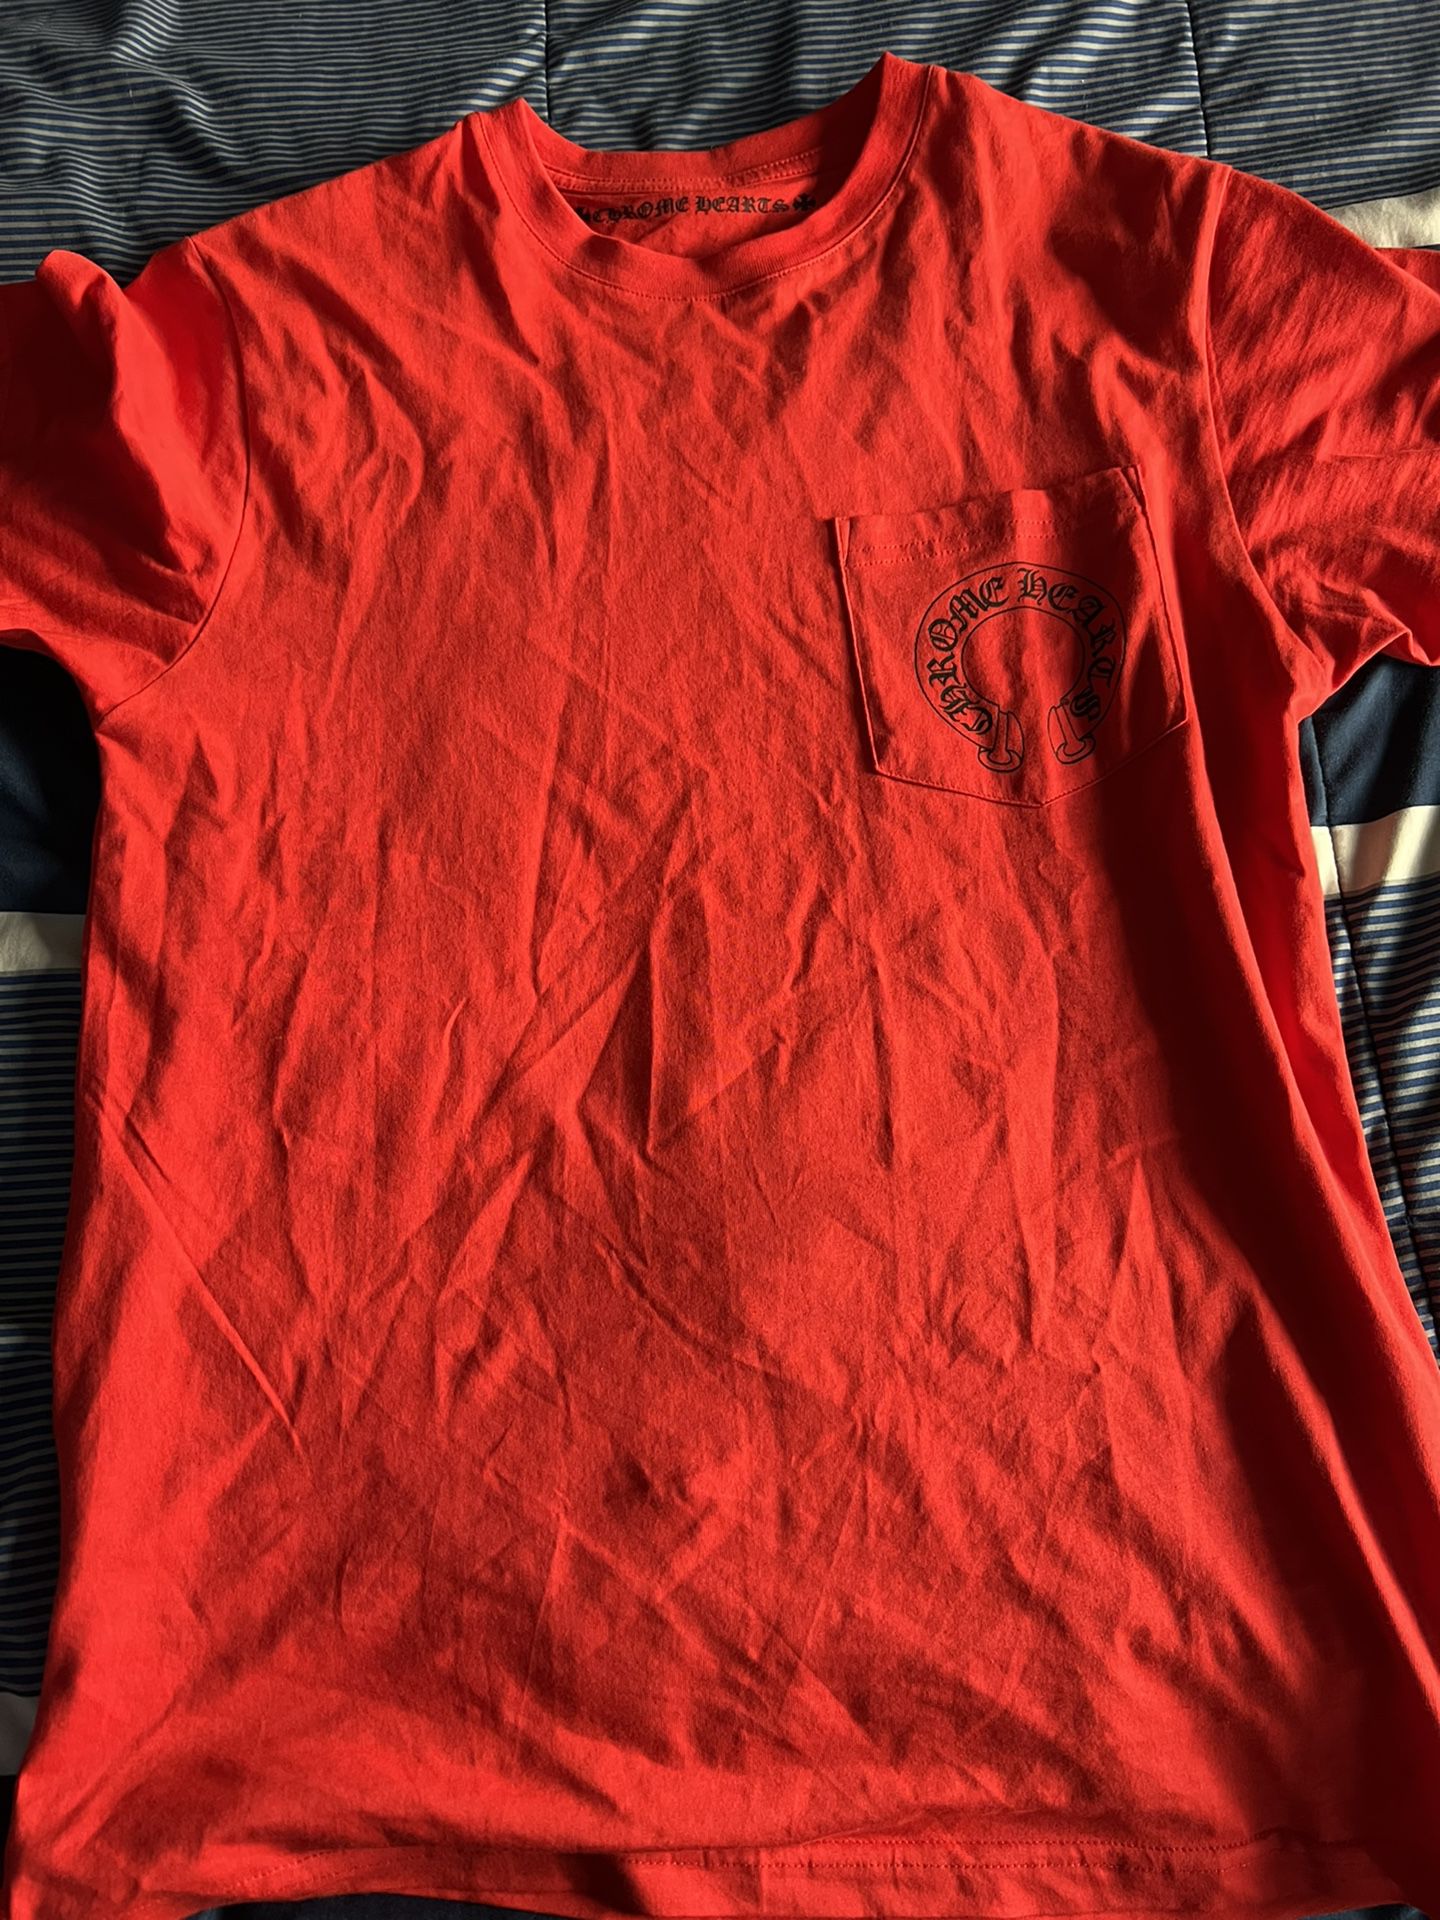 Chrome Hearts Shirt for Sale in Las Vegas, NV - OfferUp